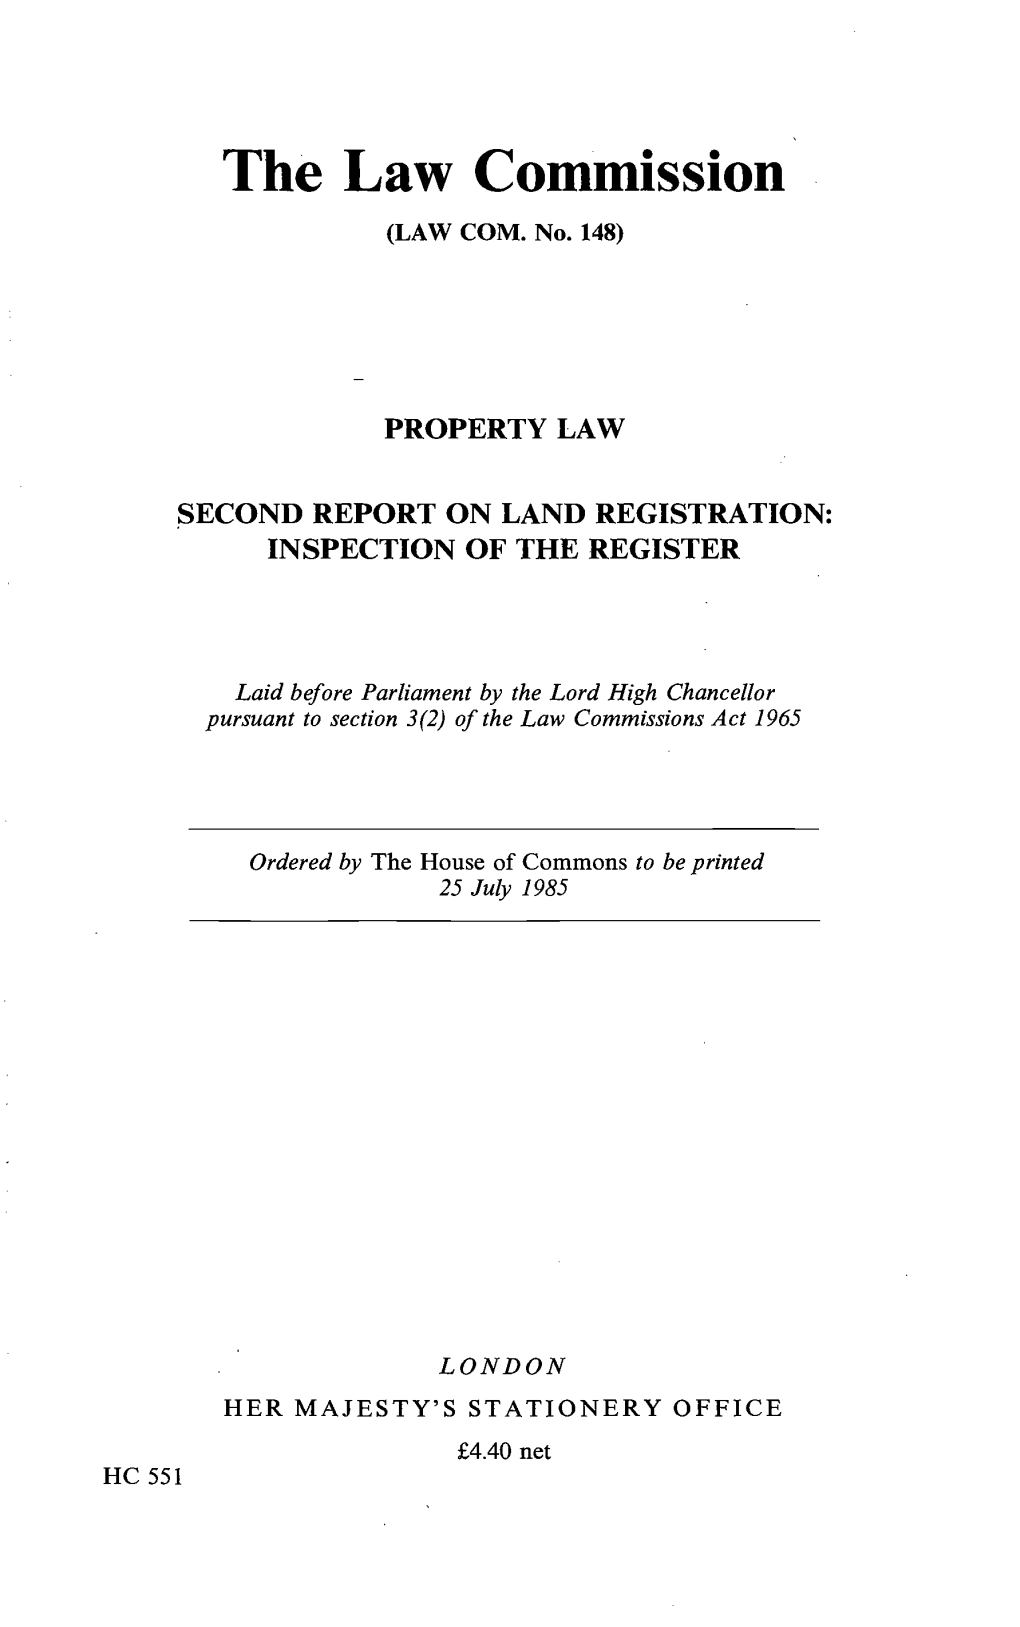 Property Law: Second Report on Land Registration Report